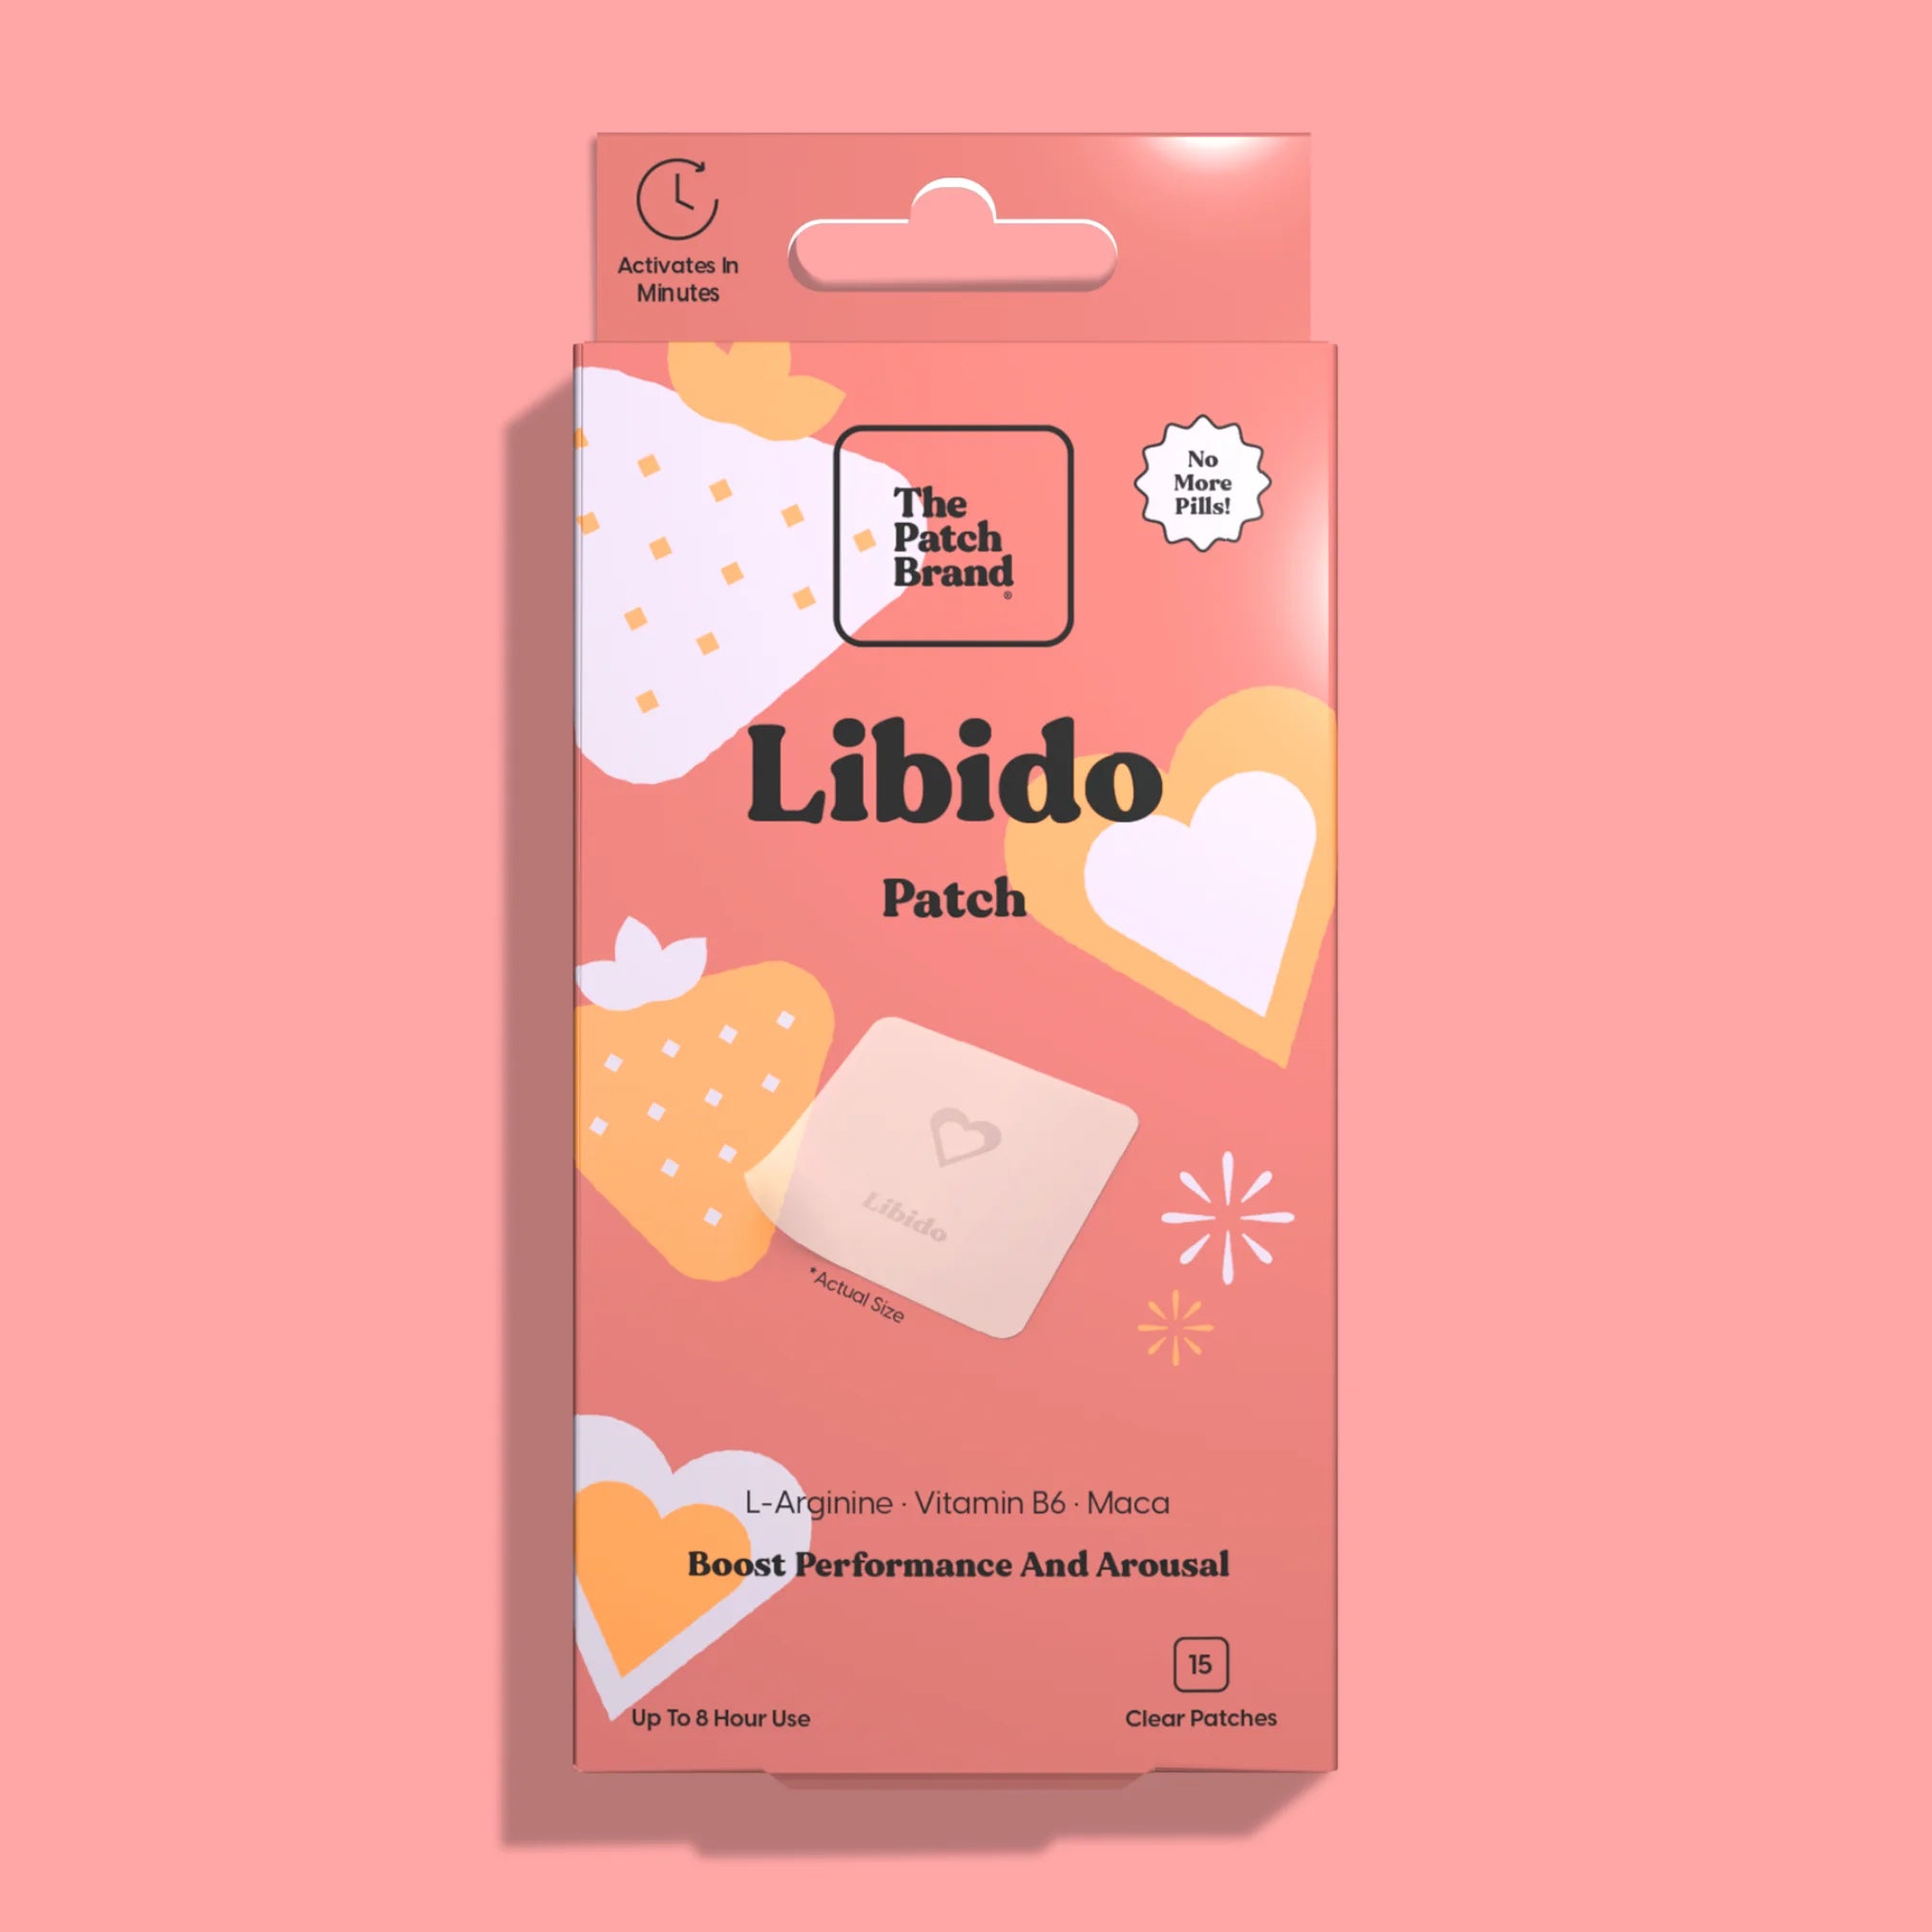 The Patch Brand Libido Patch